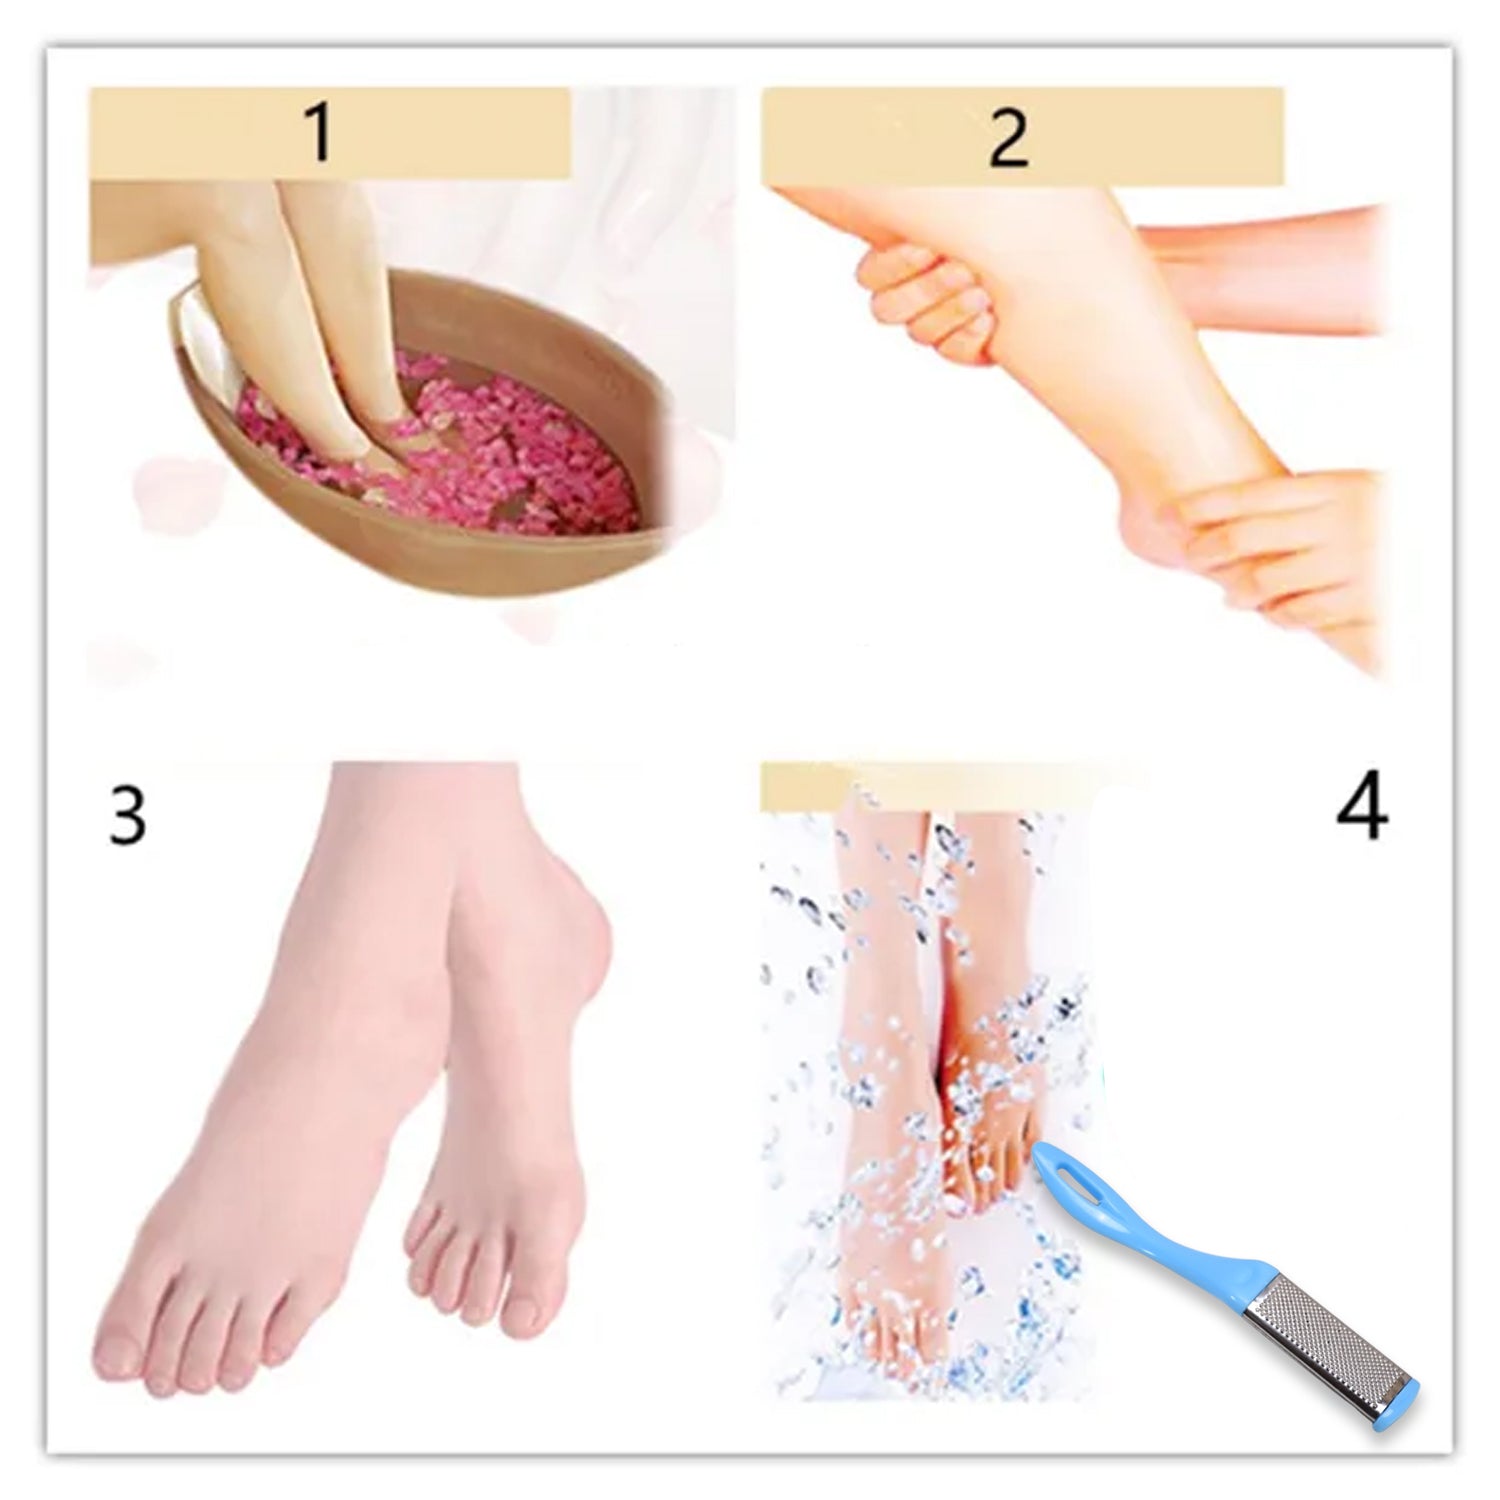 6479 Removing Hard, Cracked, Dead Skin Cells - Professional Callus Remover Foot Corn Remover 